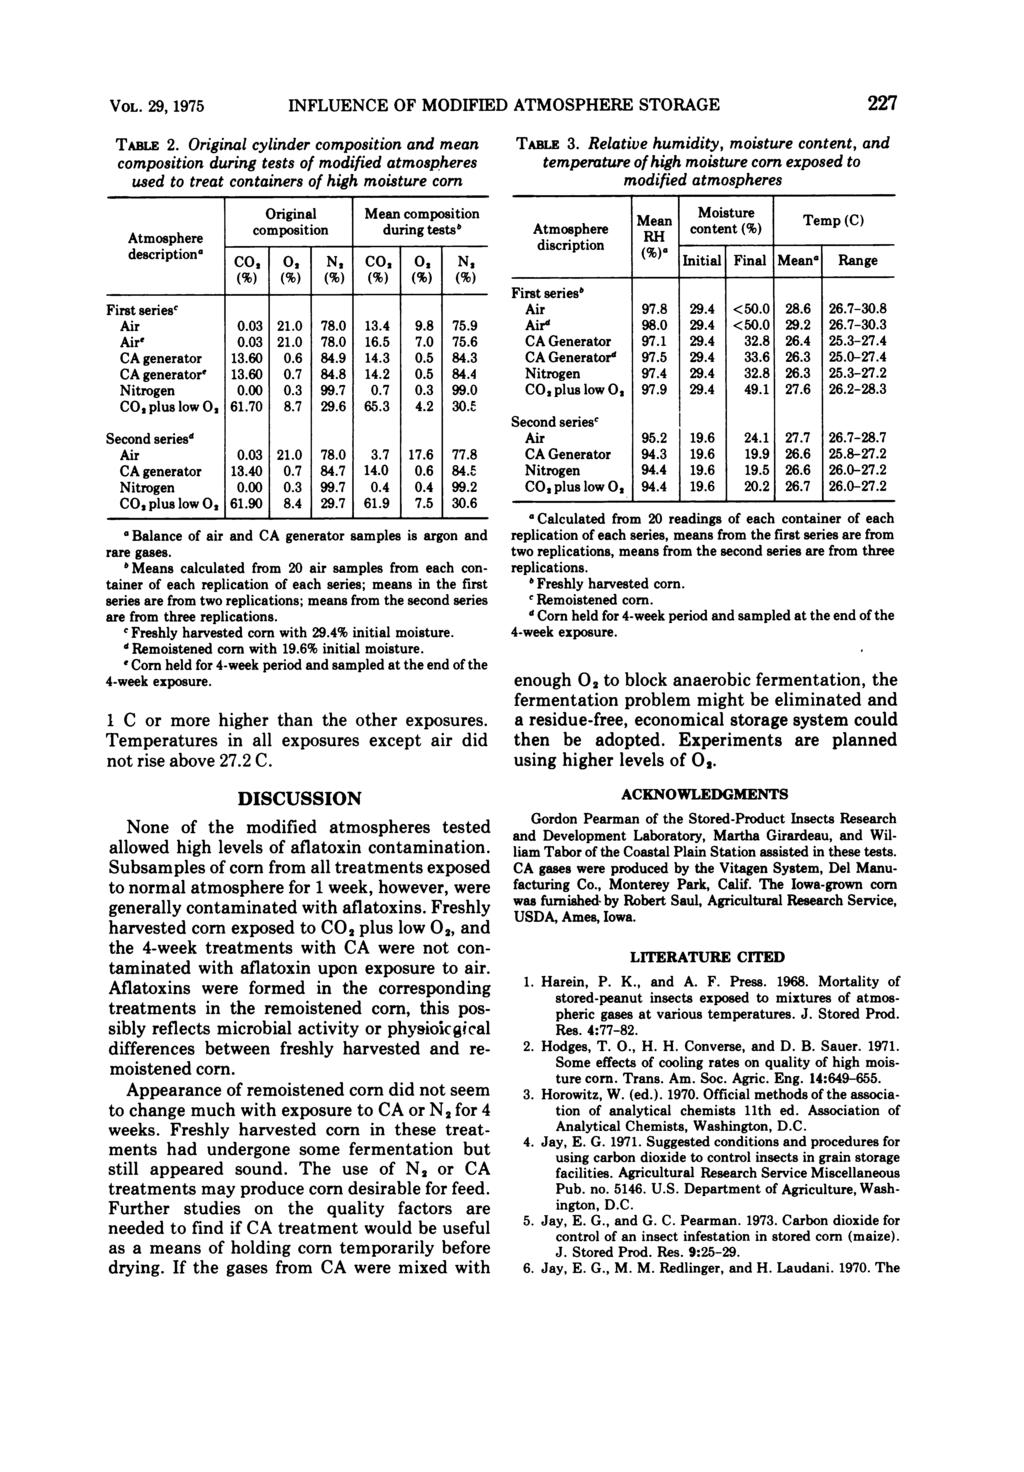 VOL. 29, 1975 INFLUENCE OF MODIFIED ATMOSPHERE STORAGE TABLE 2.